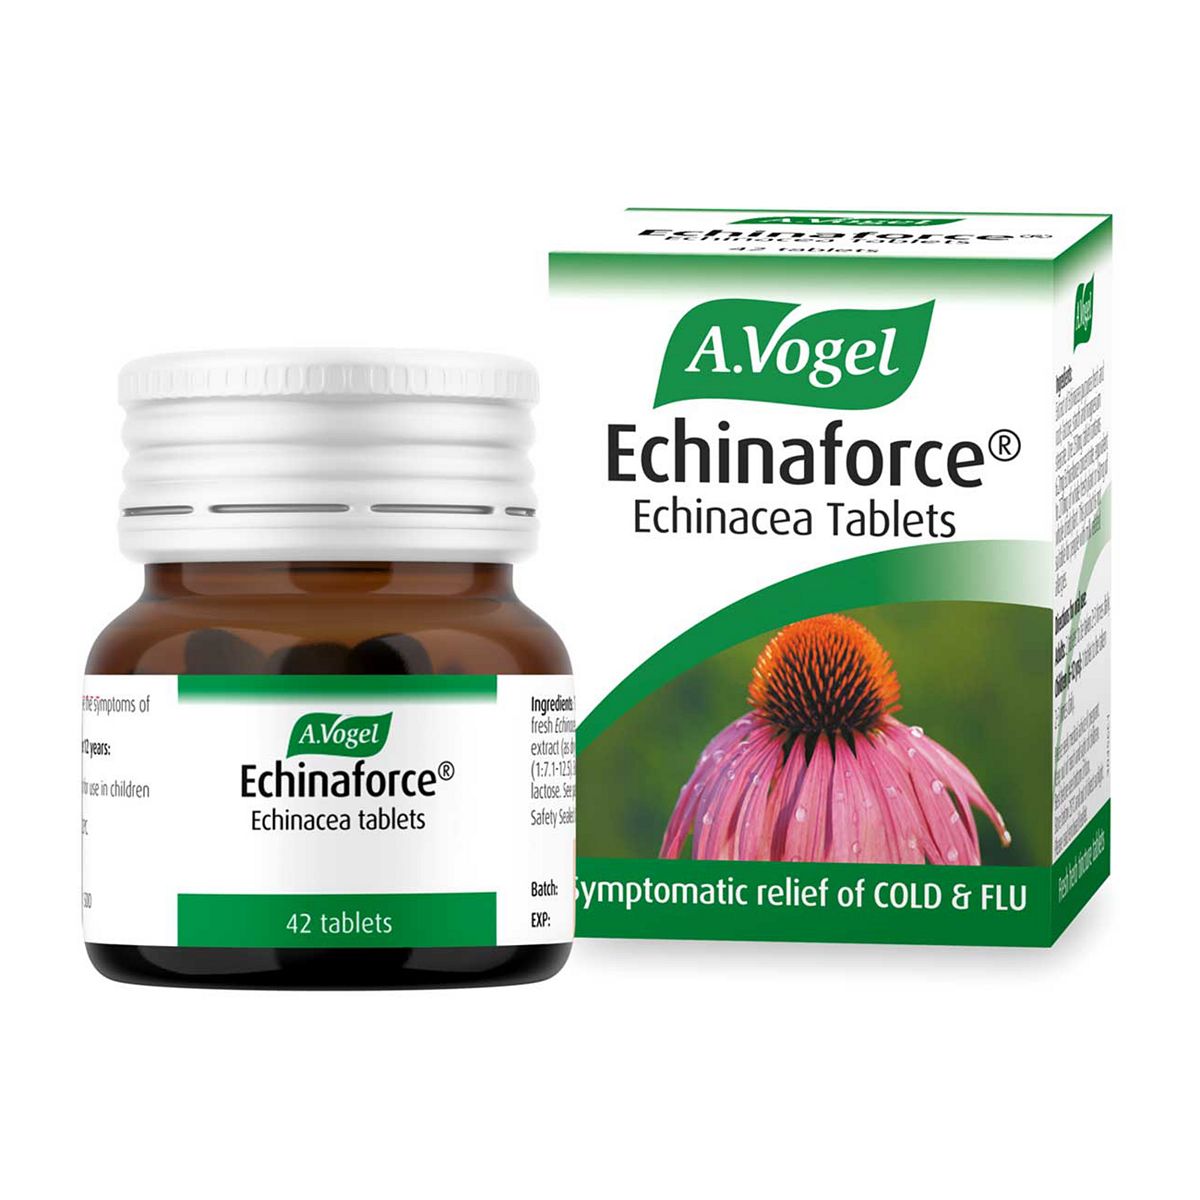 A. Vogel Echinaforce Echinacea  tablets - 42 tablets General Health & Remedies Boots   